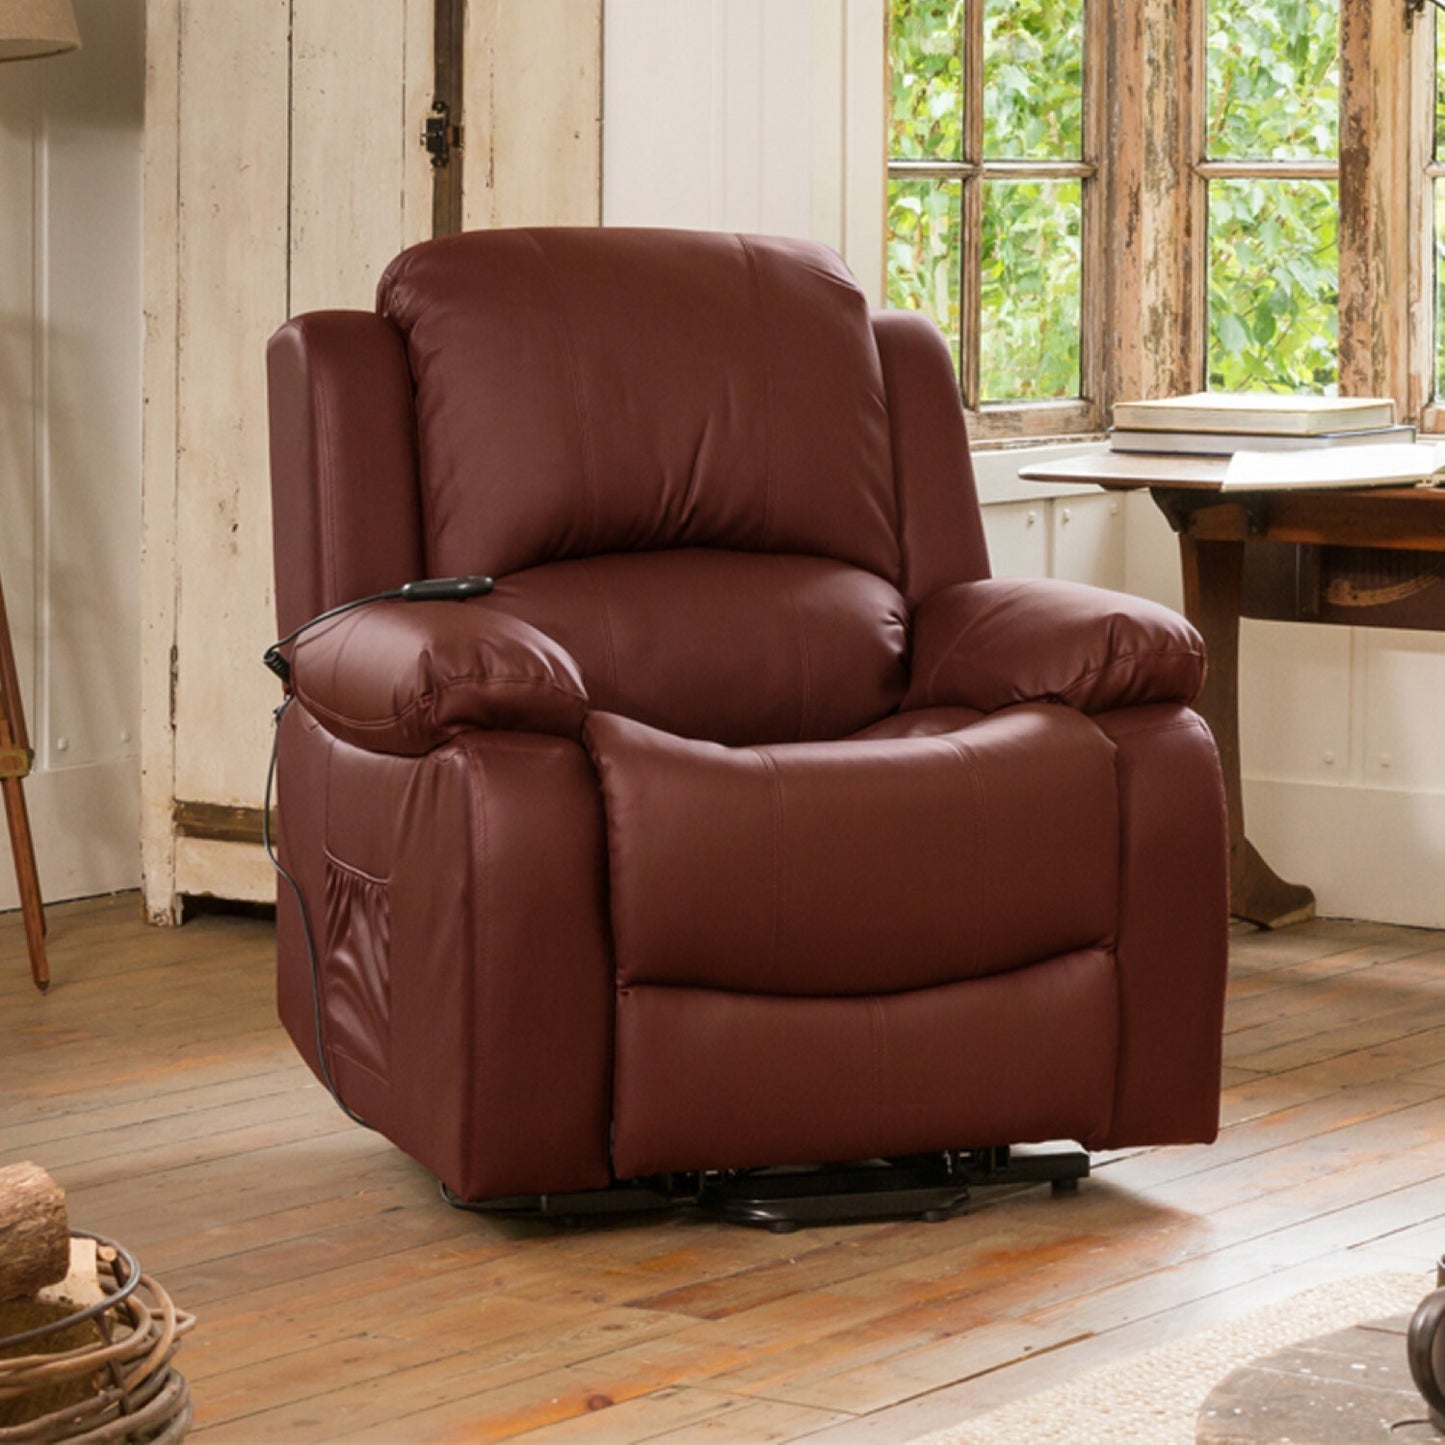 Emsworth electric riser recliner with massage and heat